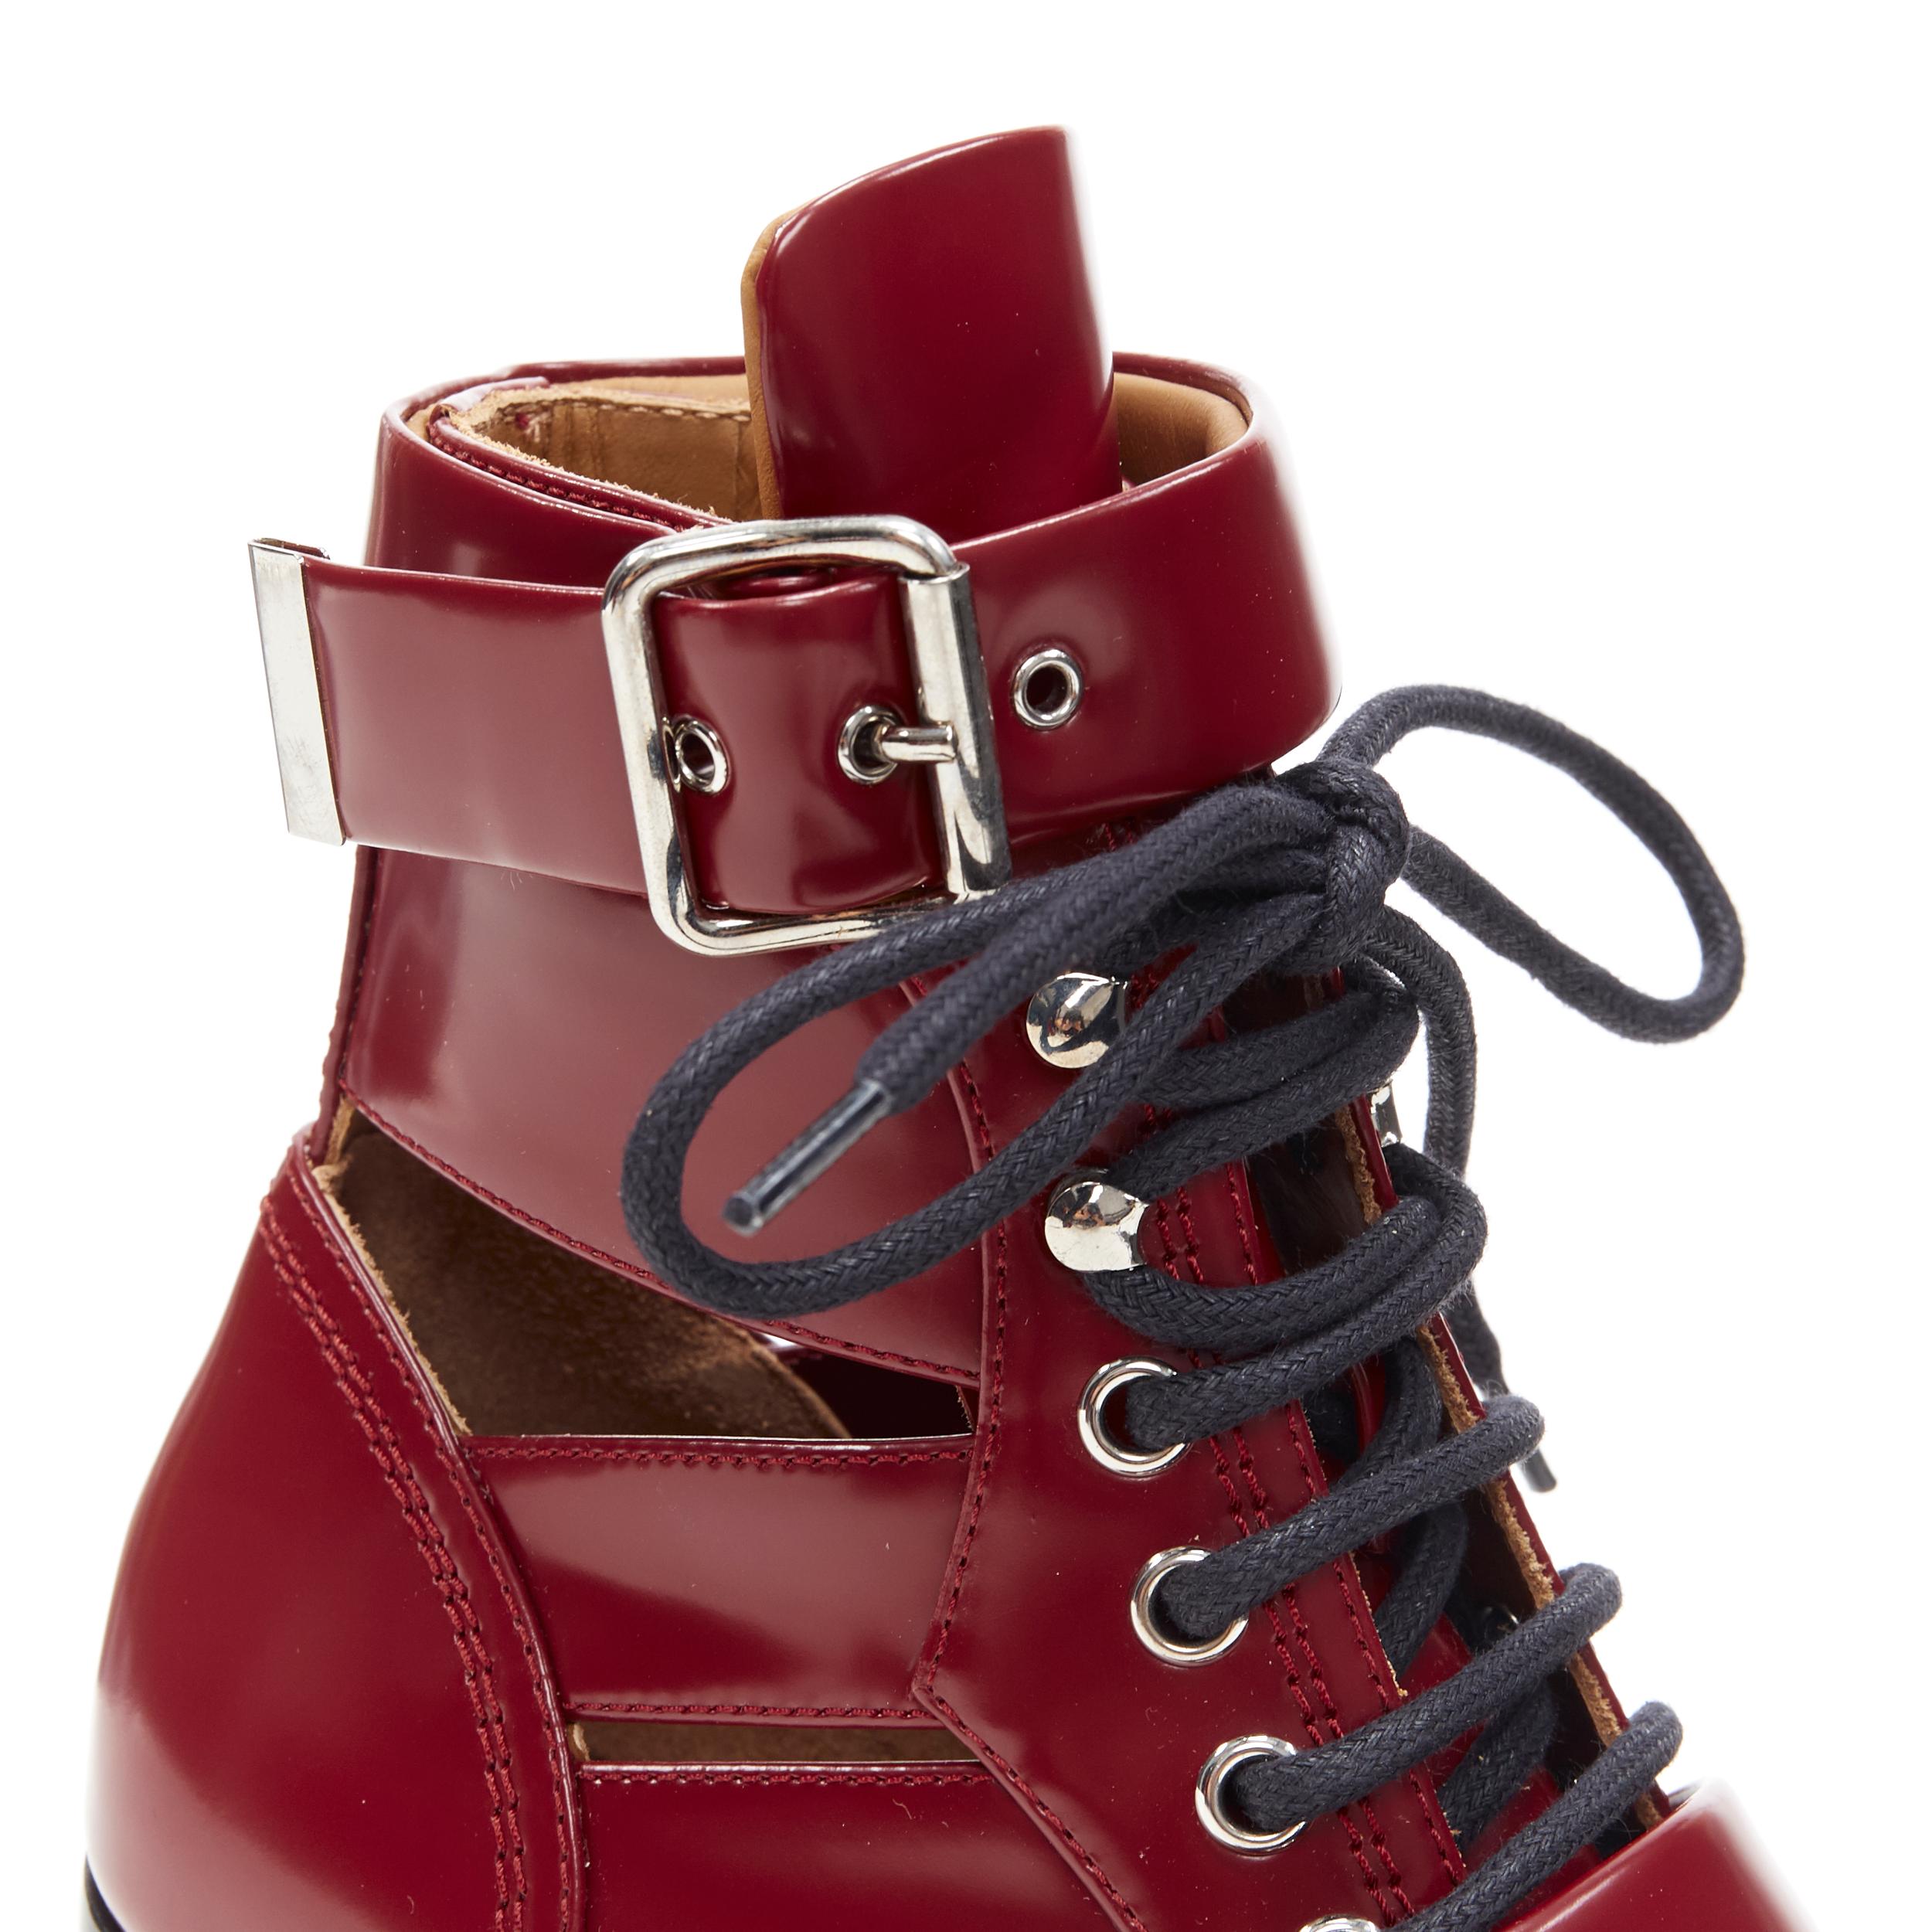 new CHLOE Rylee burgundy red leather cut out buckled pointy ankle boot EU38.5 3